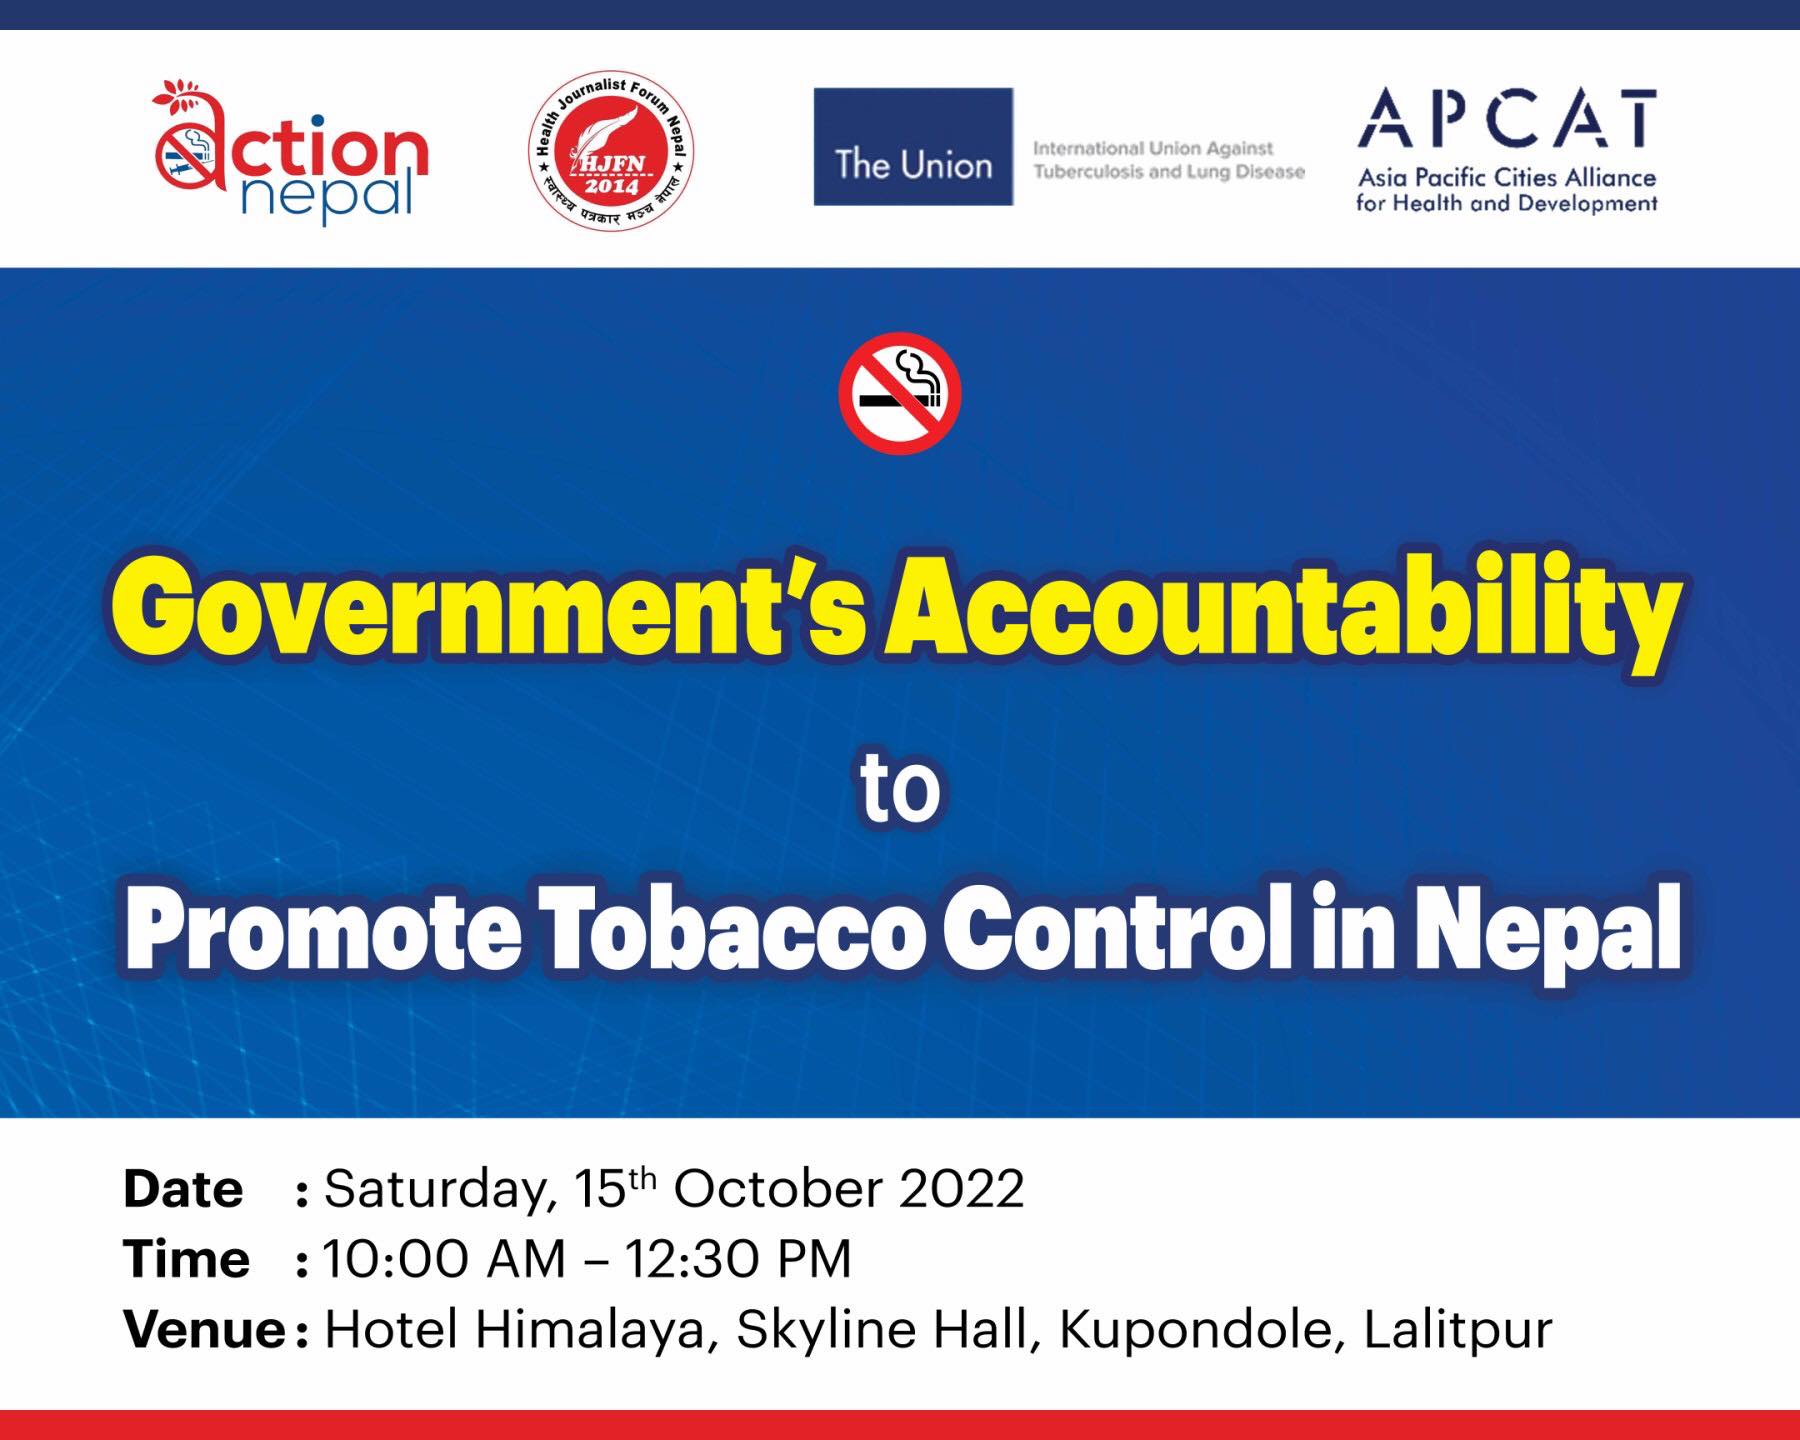 Government’s Accountability to Promote Tobacco Control in Nepal